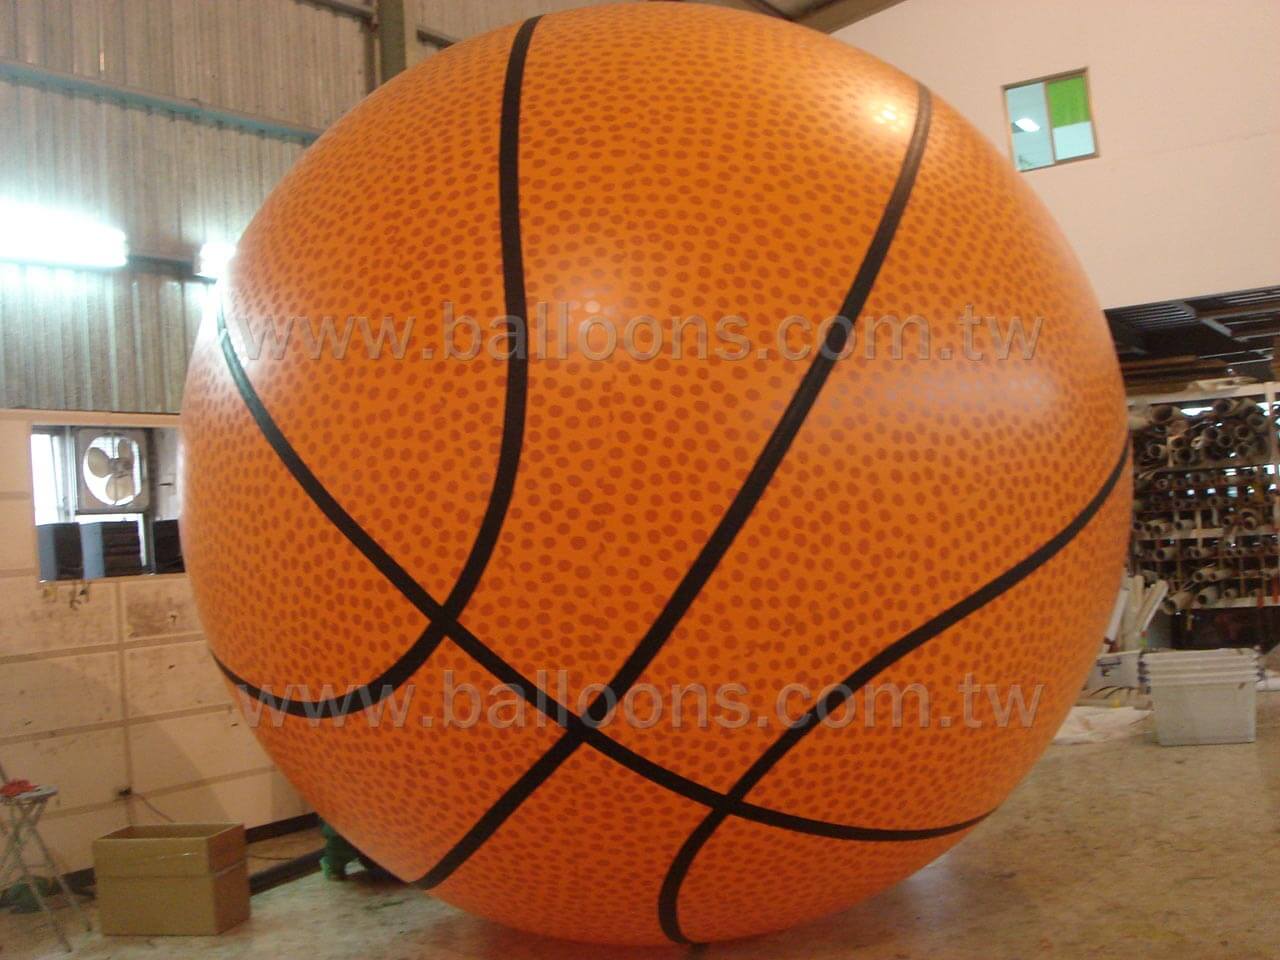 Inflatable advertising basketball balloon with printed patterns藍球廣告氣球